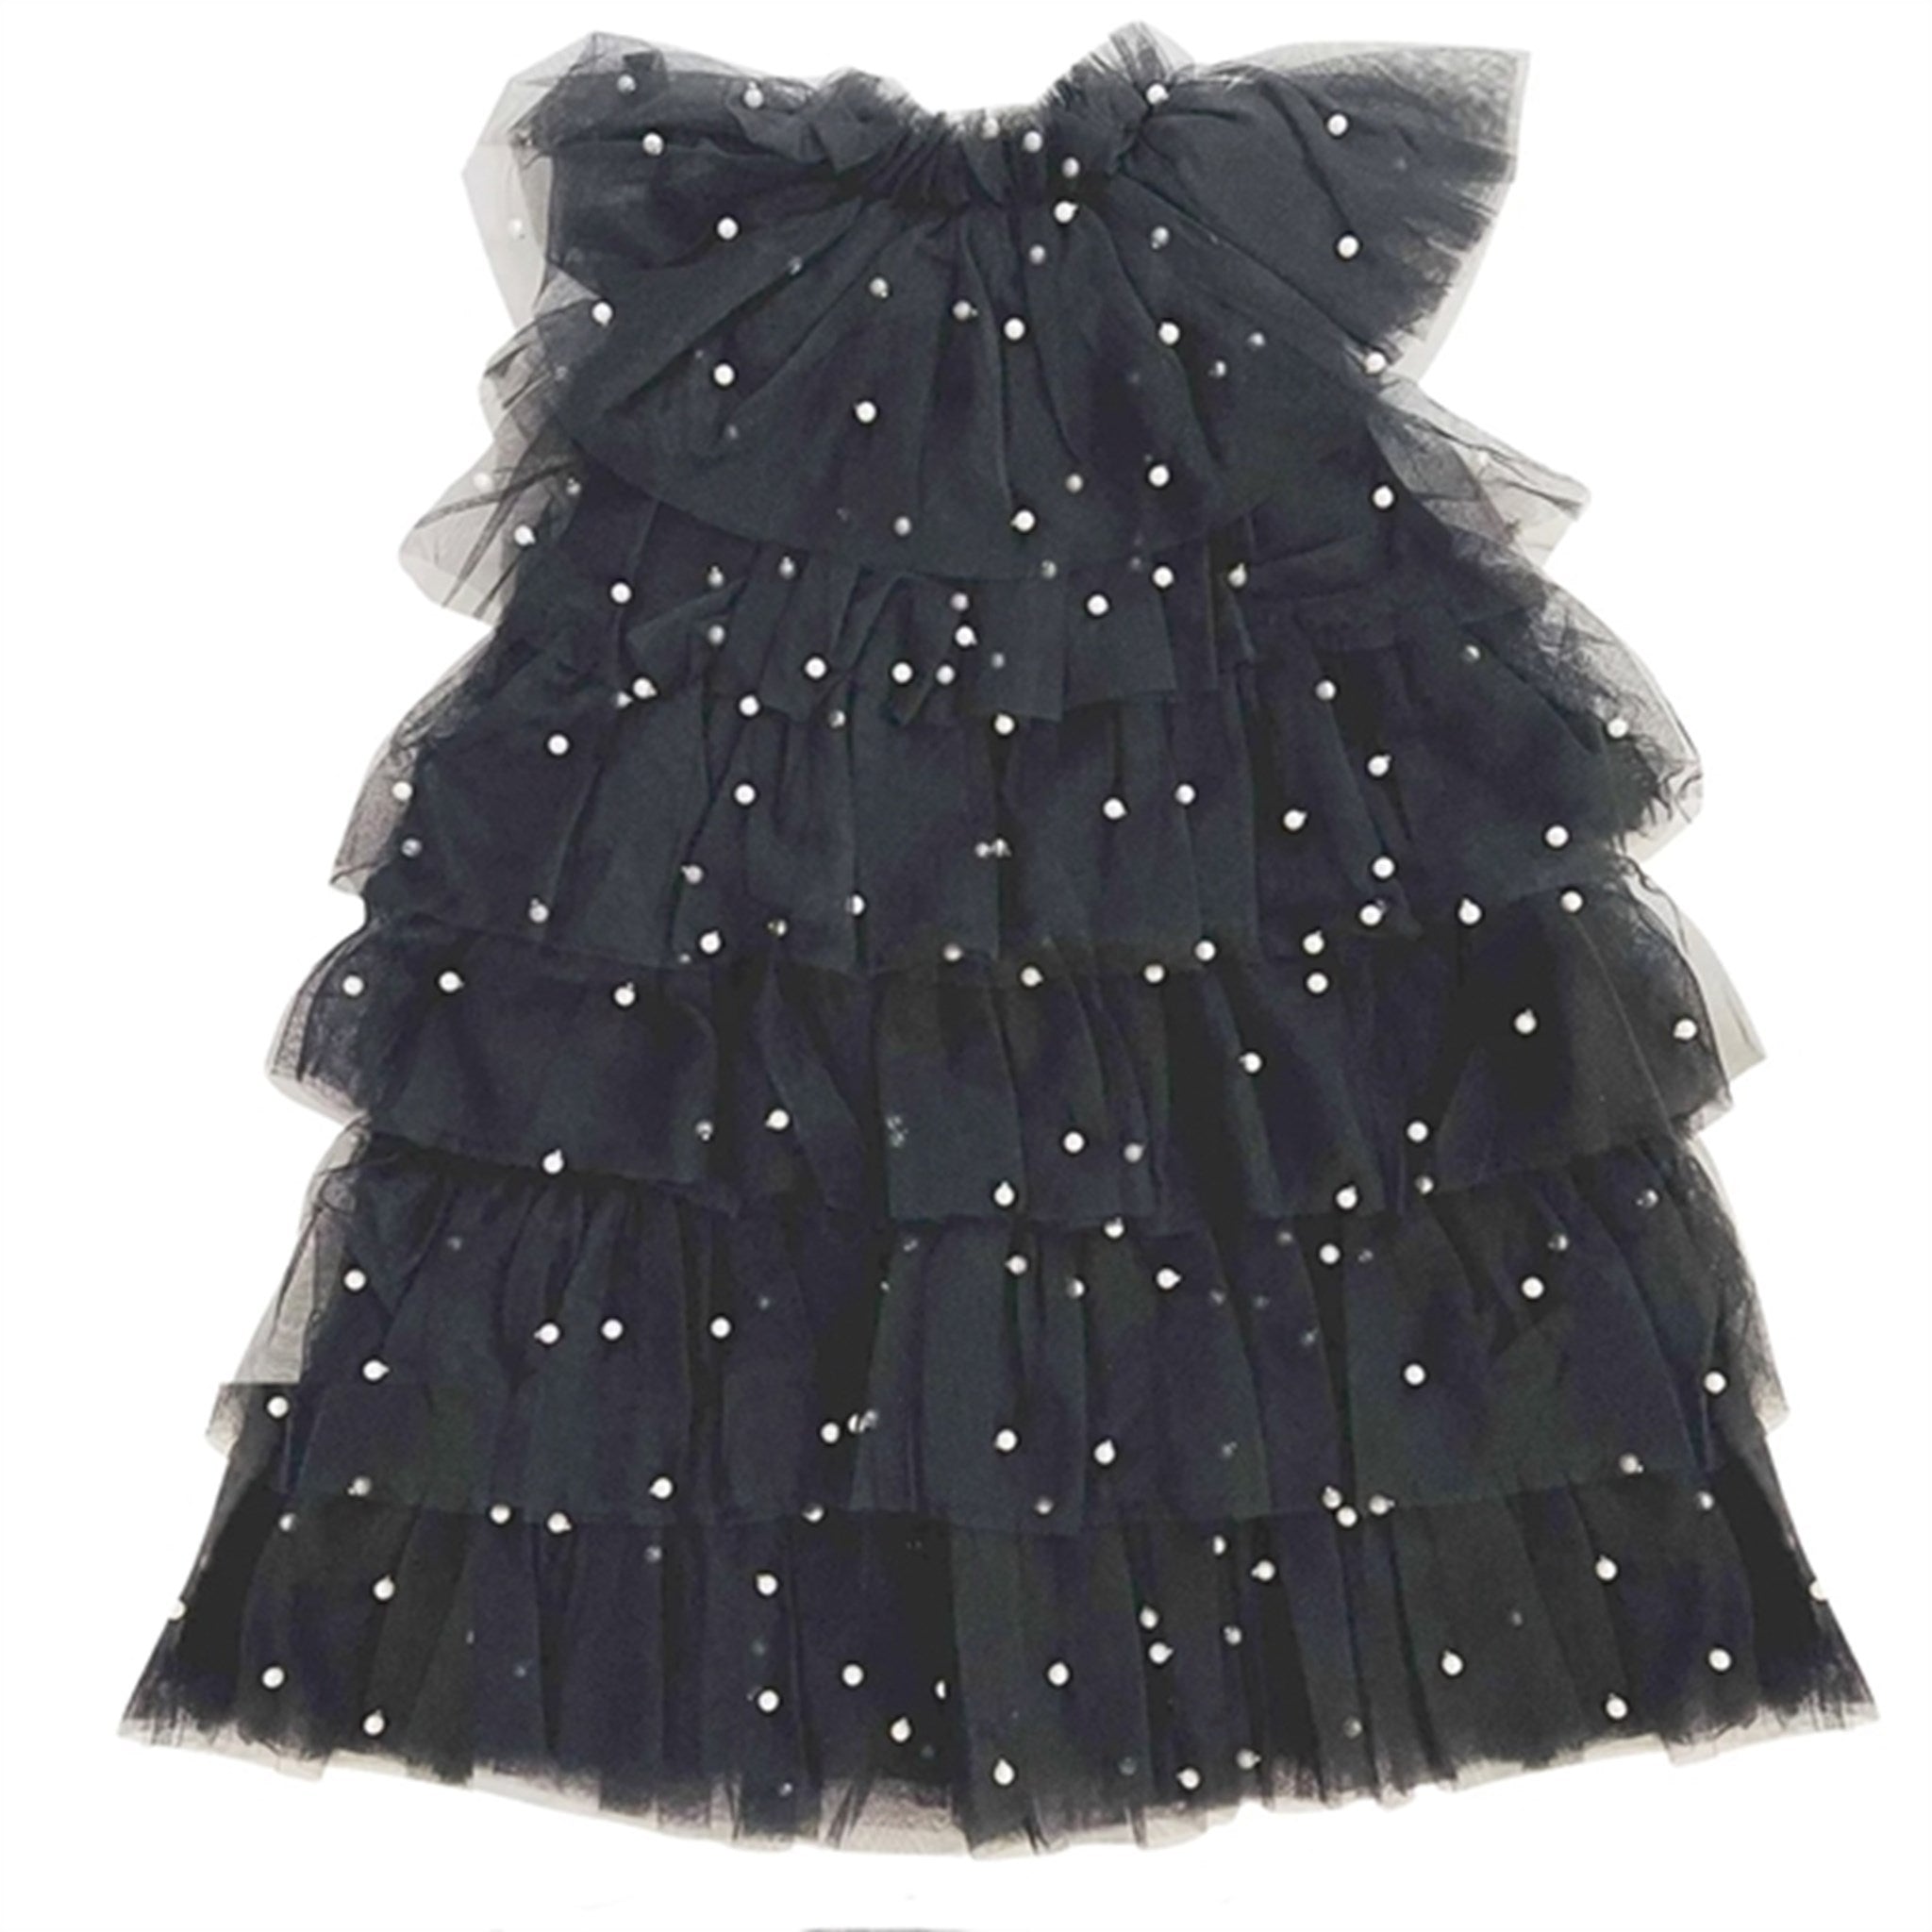 Dolly by Le Petit Tom Pearl Tutully Tiered Tulle Tuttu Dress Black